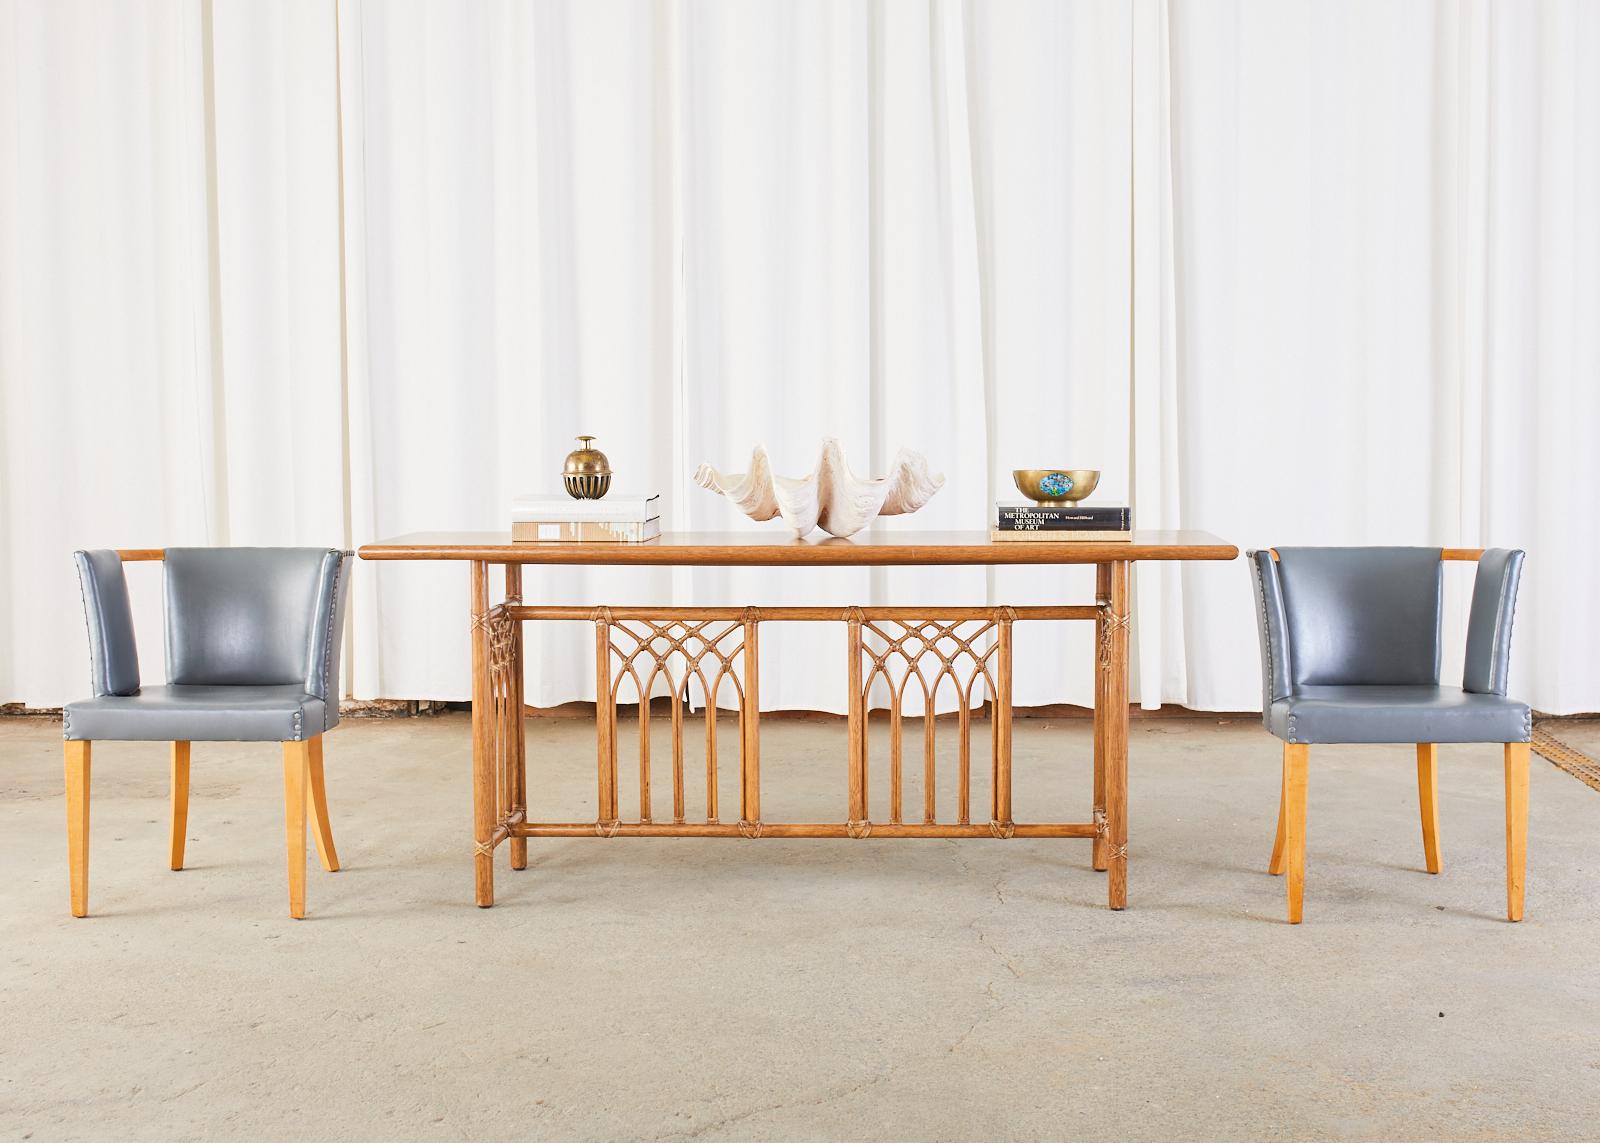 Distinctive oak and rattan sofa or console table made by McGuire in the California organic modern style. The long table features an oak top bordered with a rattan bull nose edge. The trestle style base has four windows decorated with rattan poles